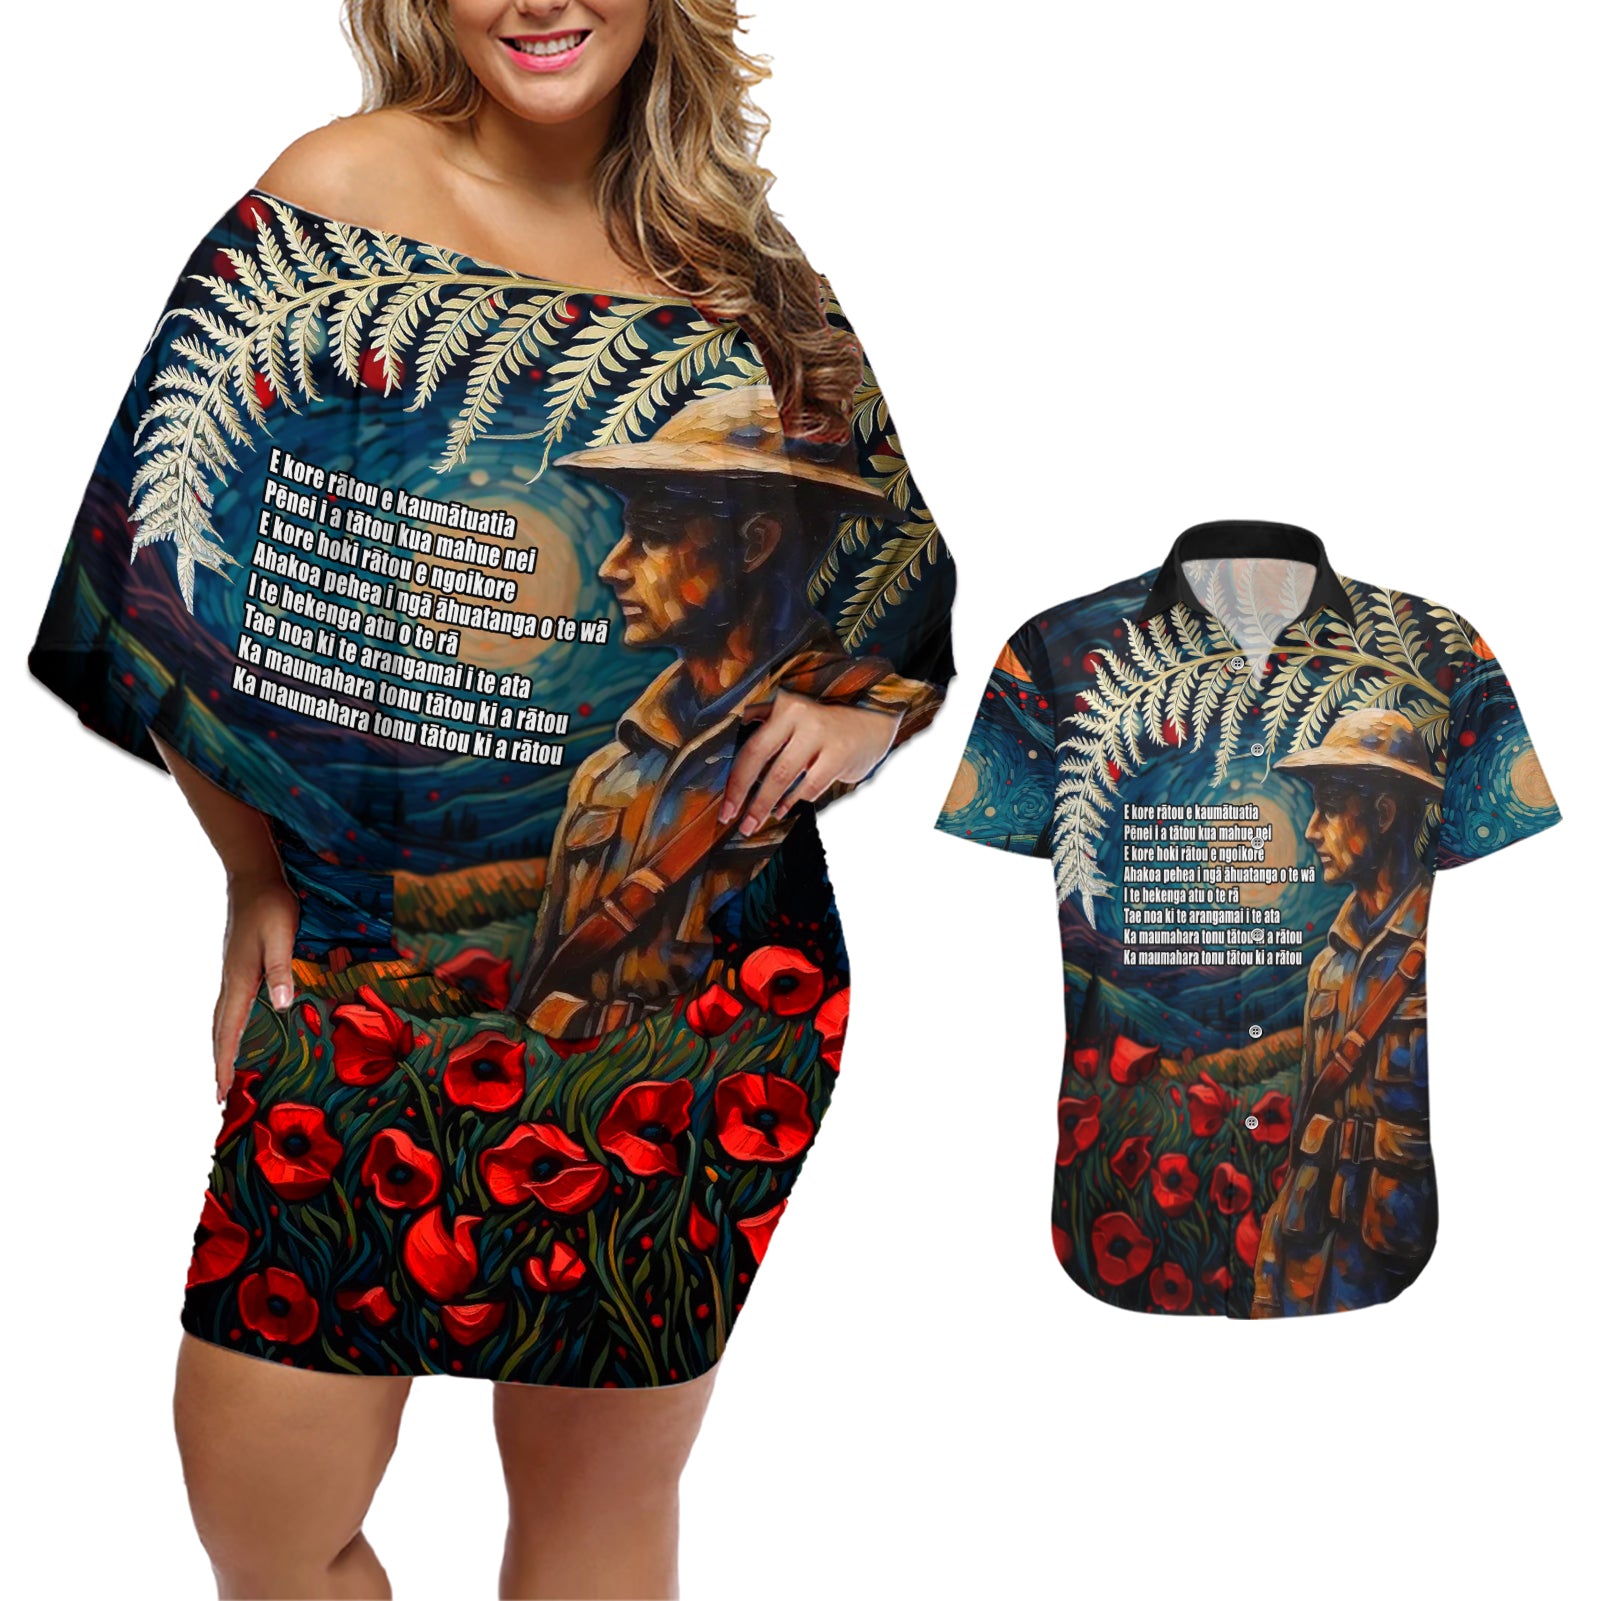 New Zealand Soldier ANZAC Day Couples Matching Off Shoulder Short Dress and Hawaiian Shirt Silver Fern Starry Night Style LT03 Blue - Polynesian Pride